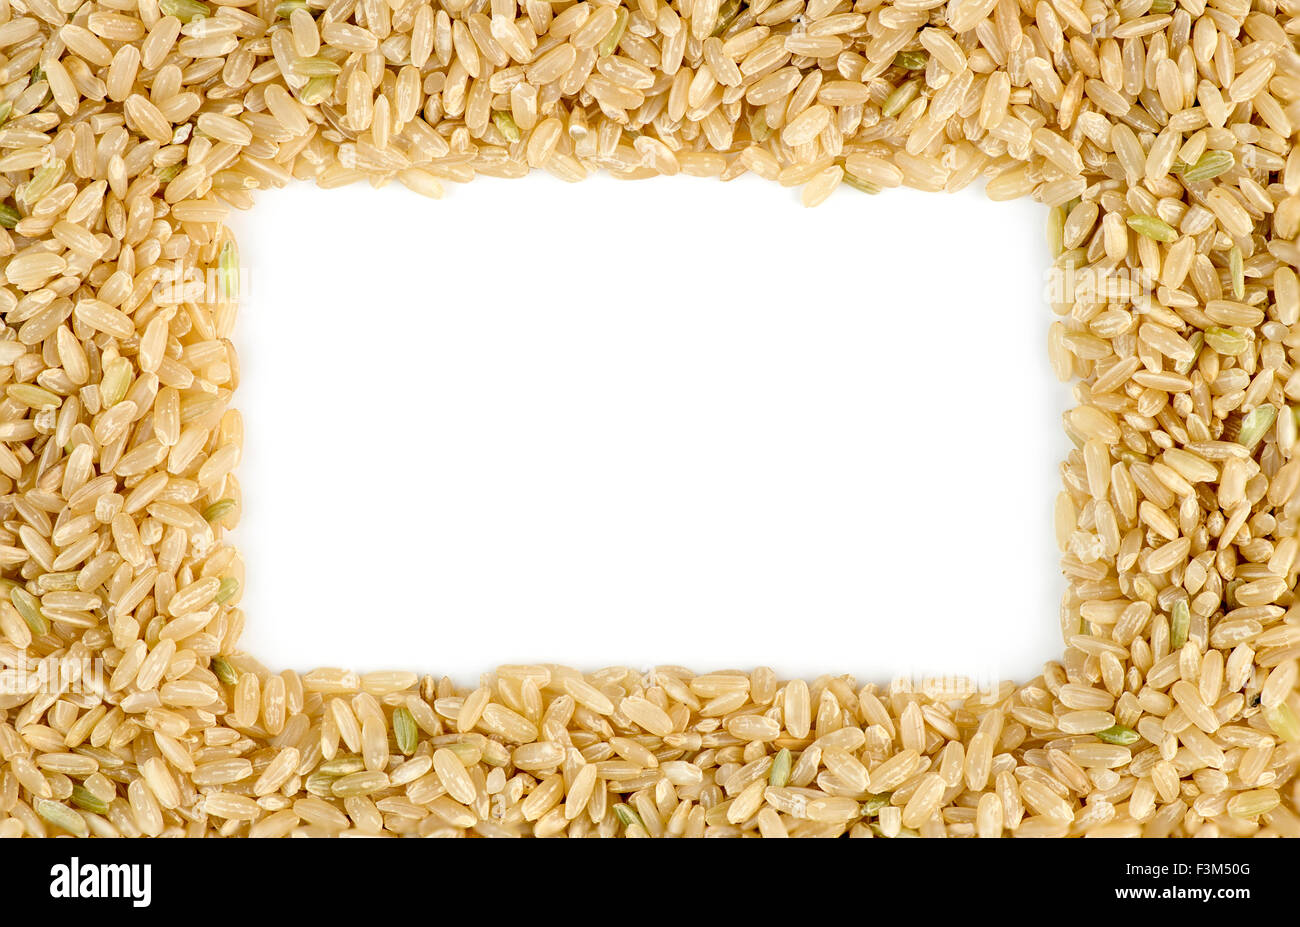 White copyspace surrounded by macro of whole brown rice grains Stock Photo